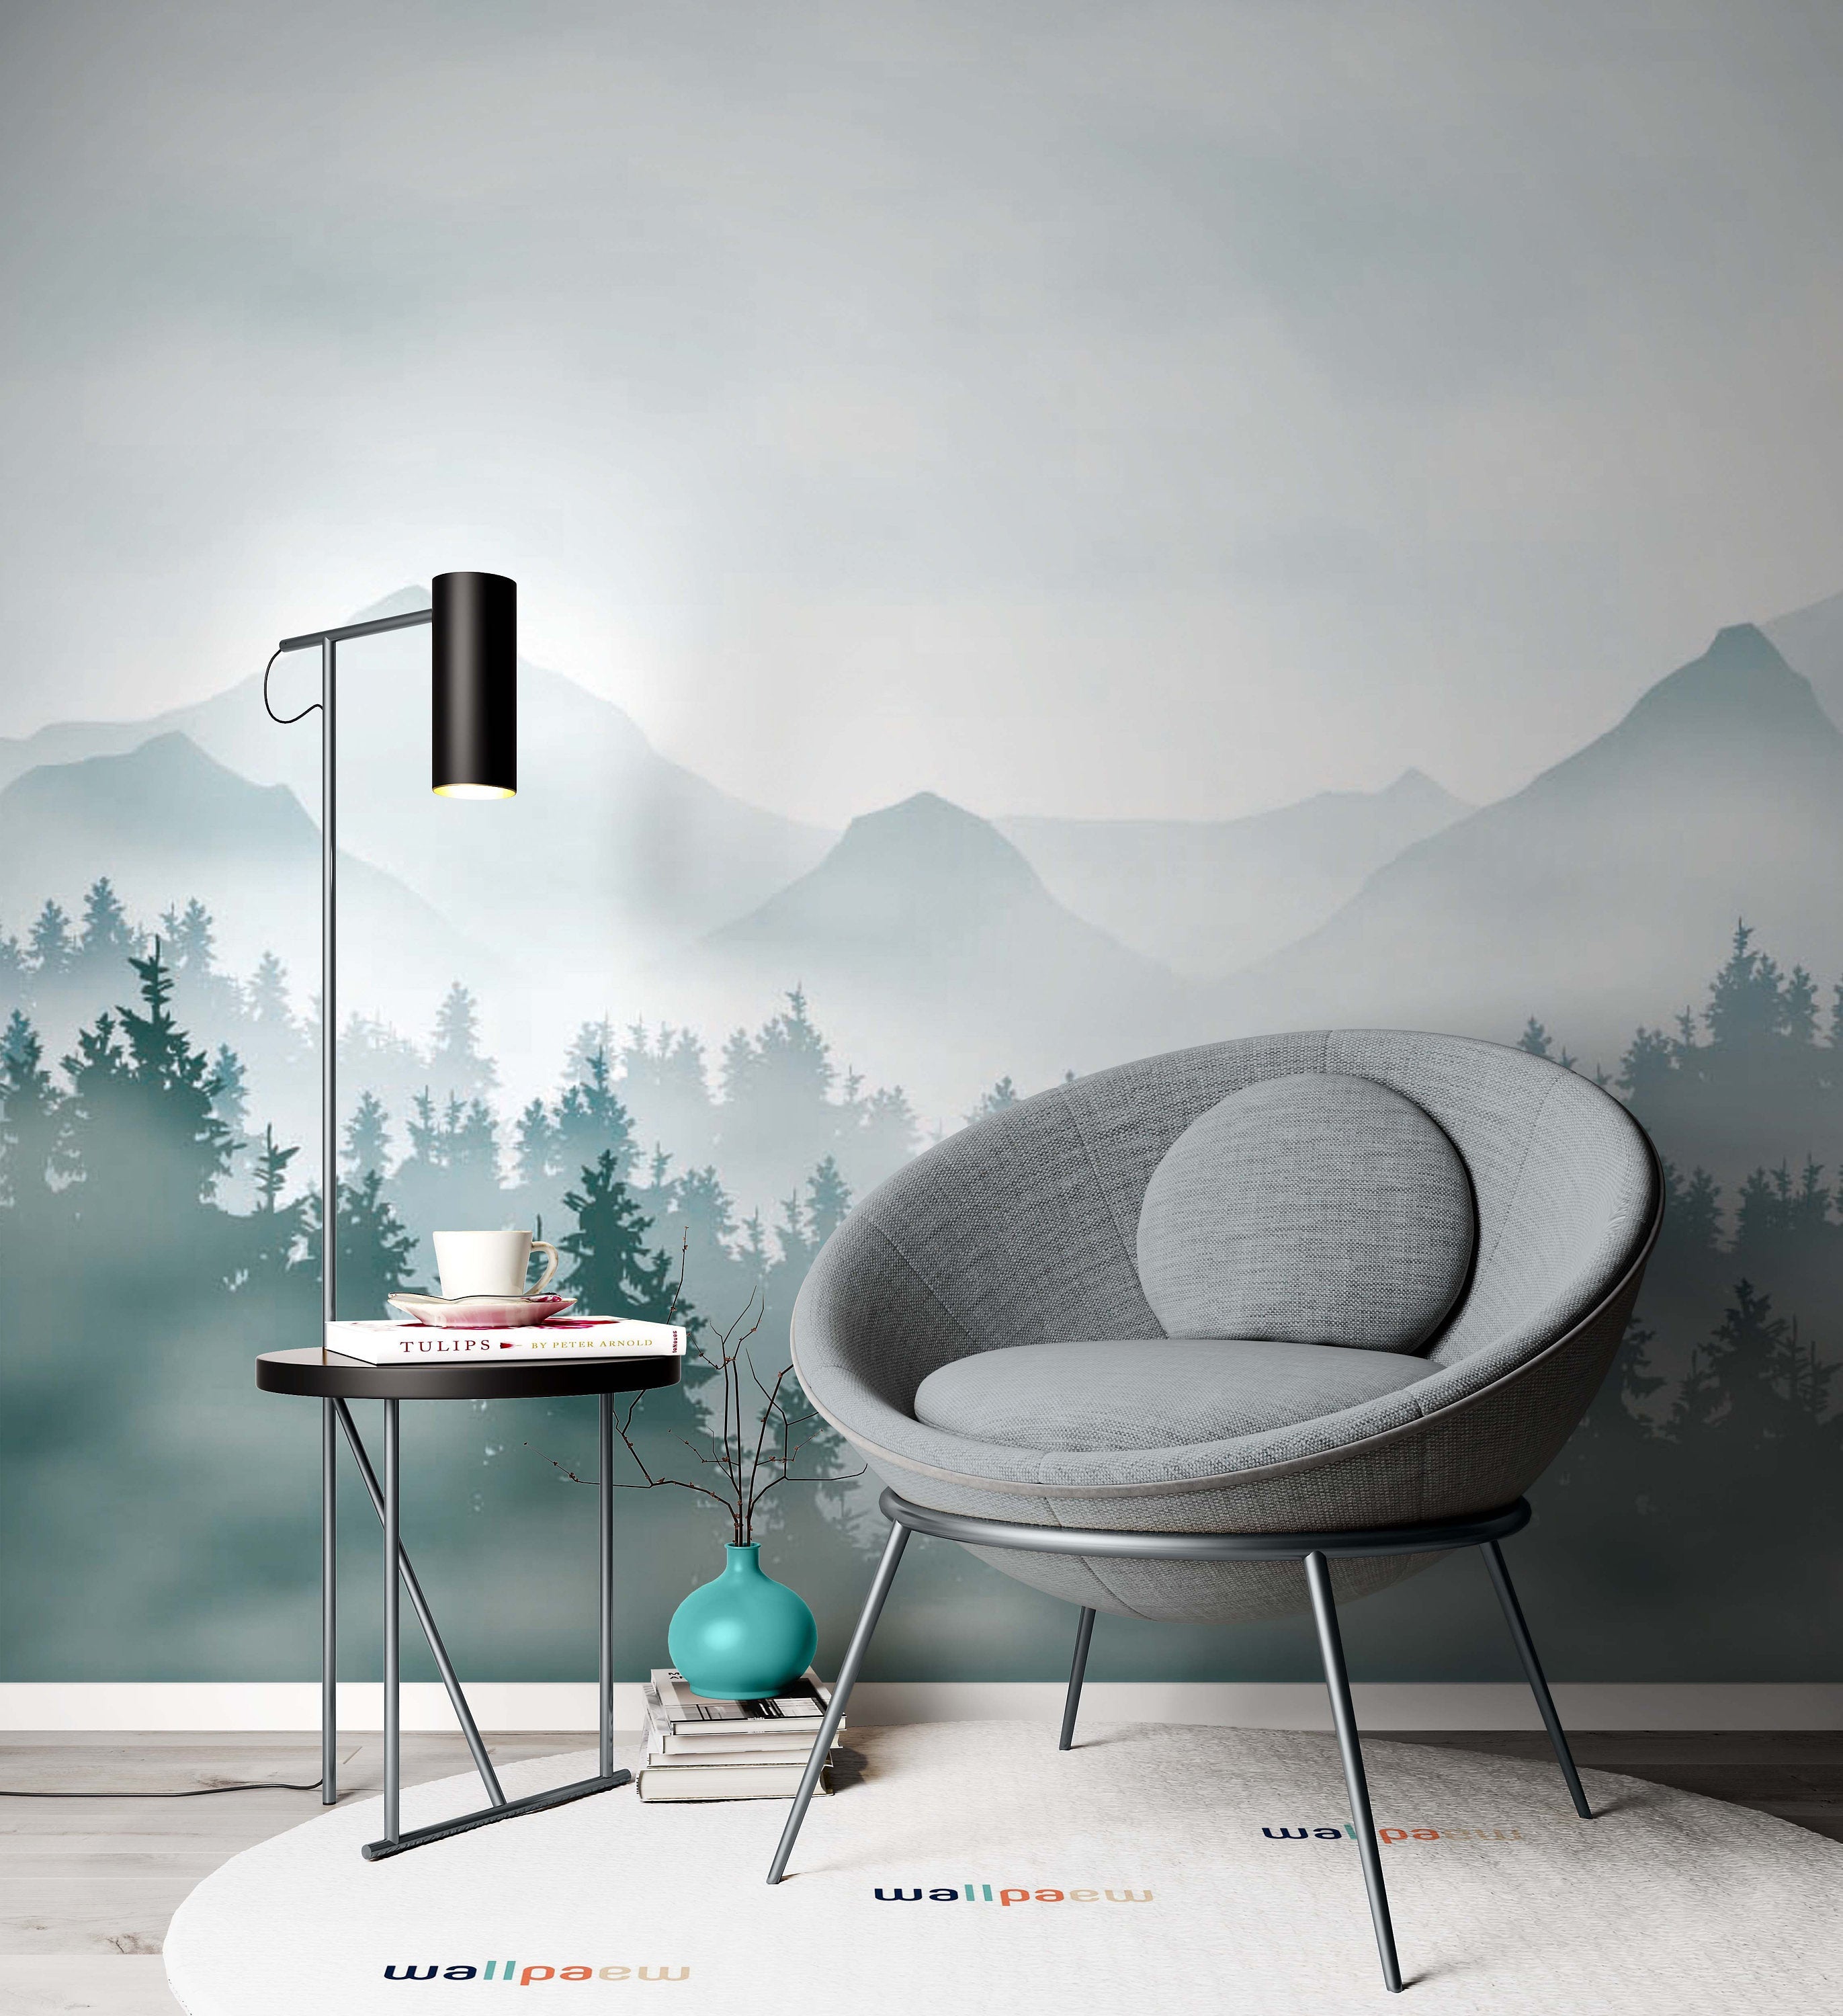 Mountain and Forest Landscape Natural Nature Wallpaper Cafe Restaurant Decoration Living Room Bedroom Wall Covering Mural Home Decor Art